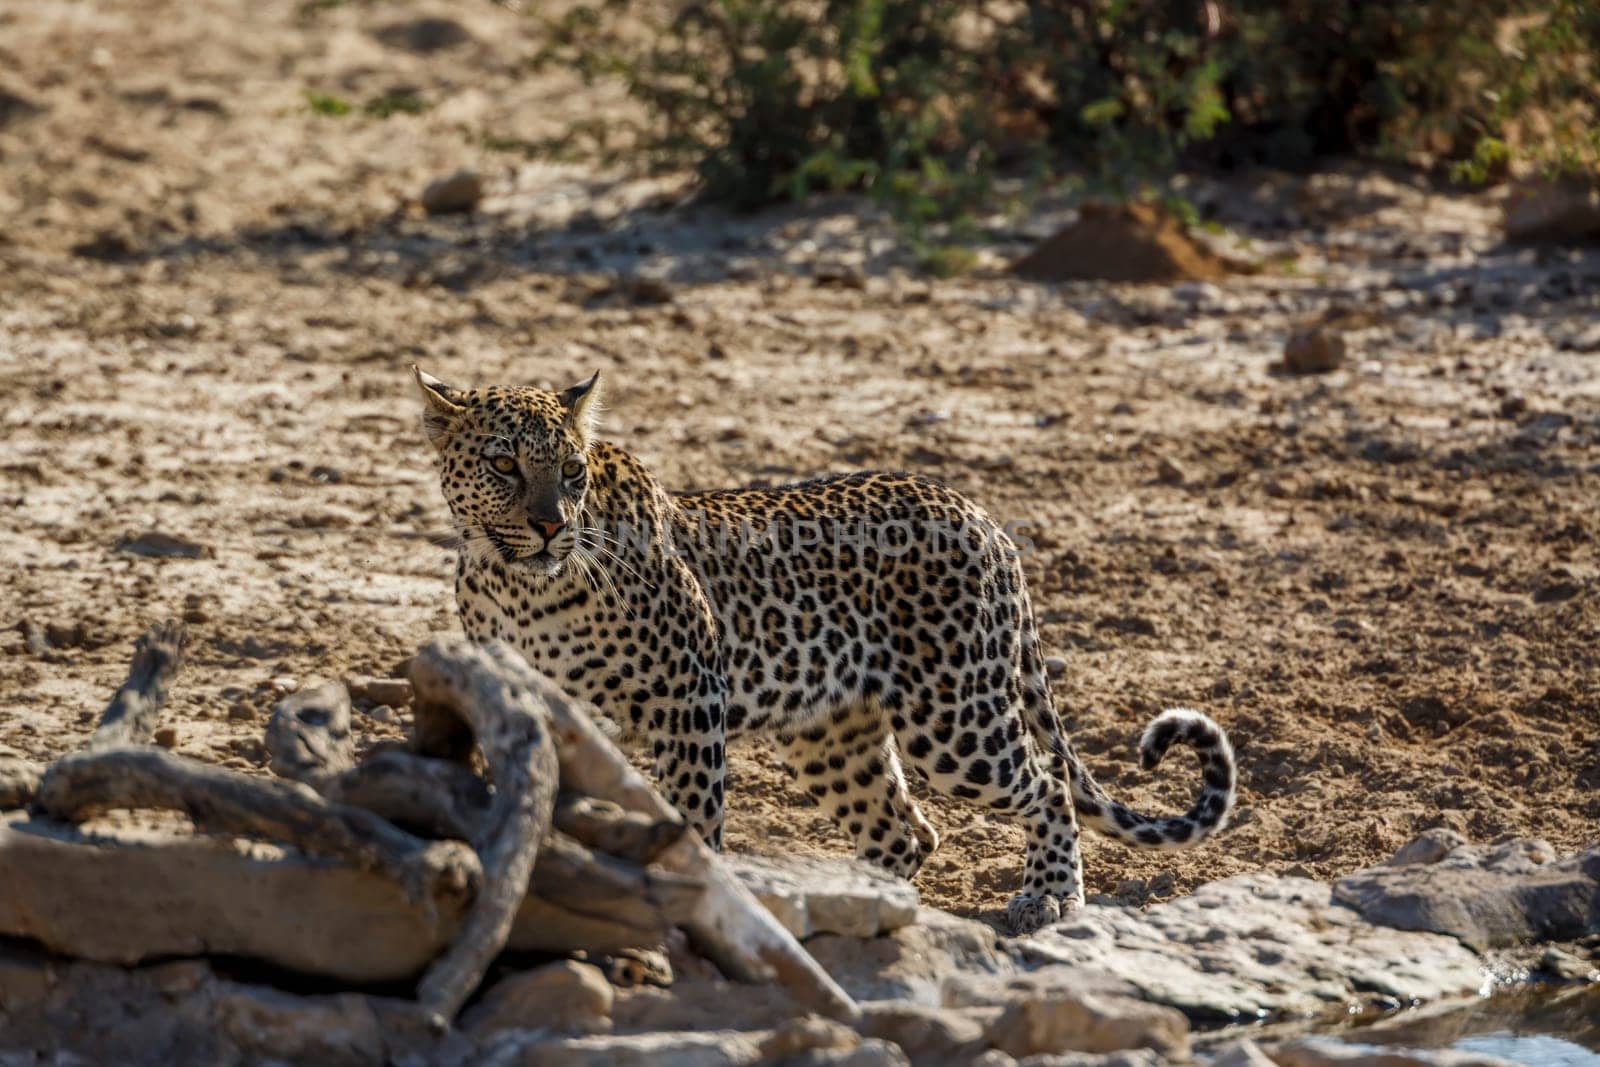 Leopard standing at waterhole in Kgalagadi transfrontier park, South Africa; specie Panthera pardus family of Felidae